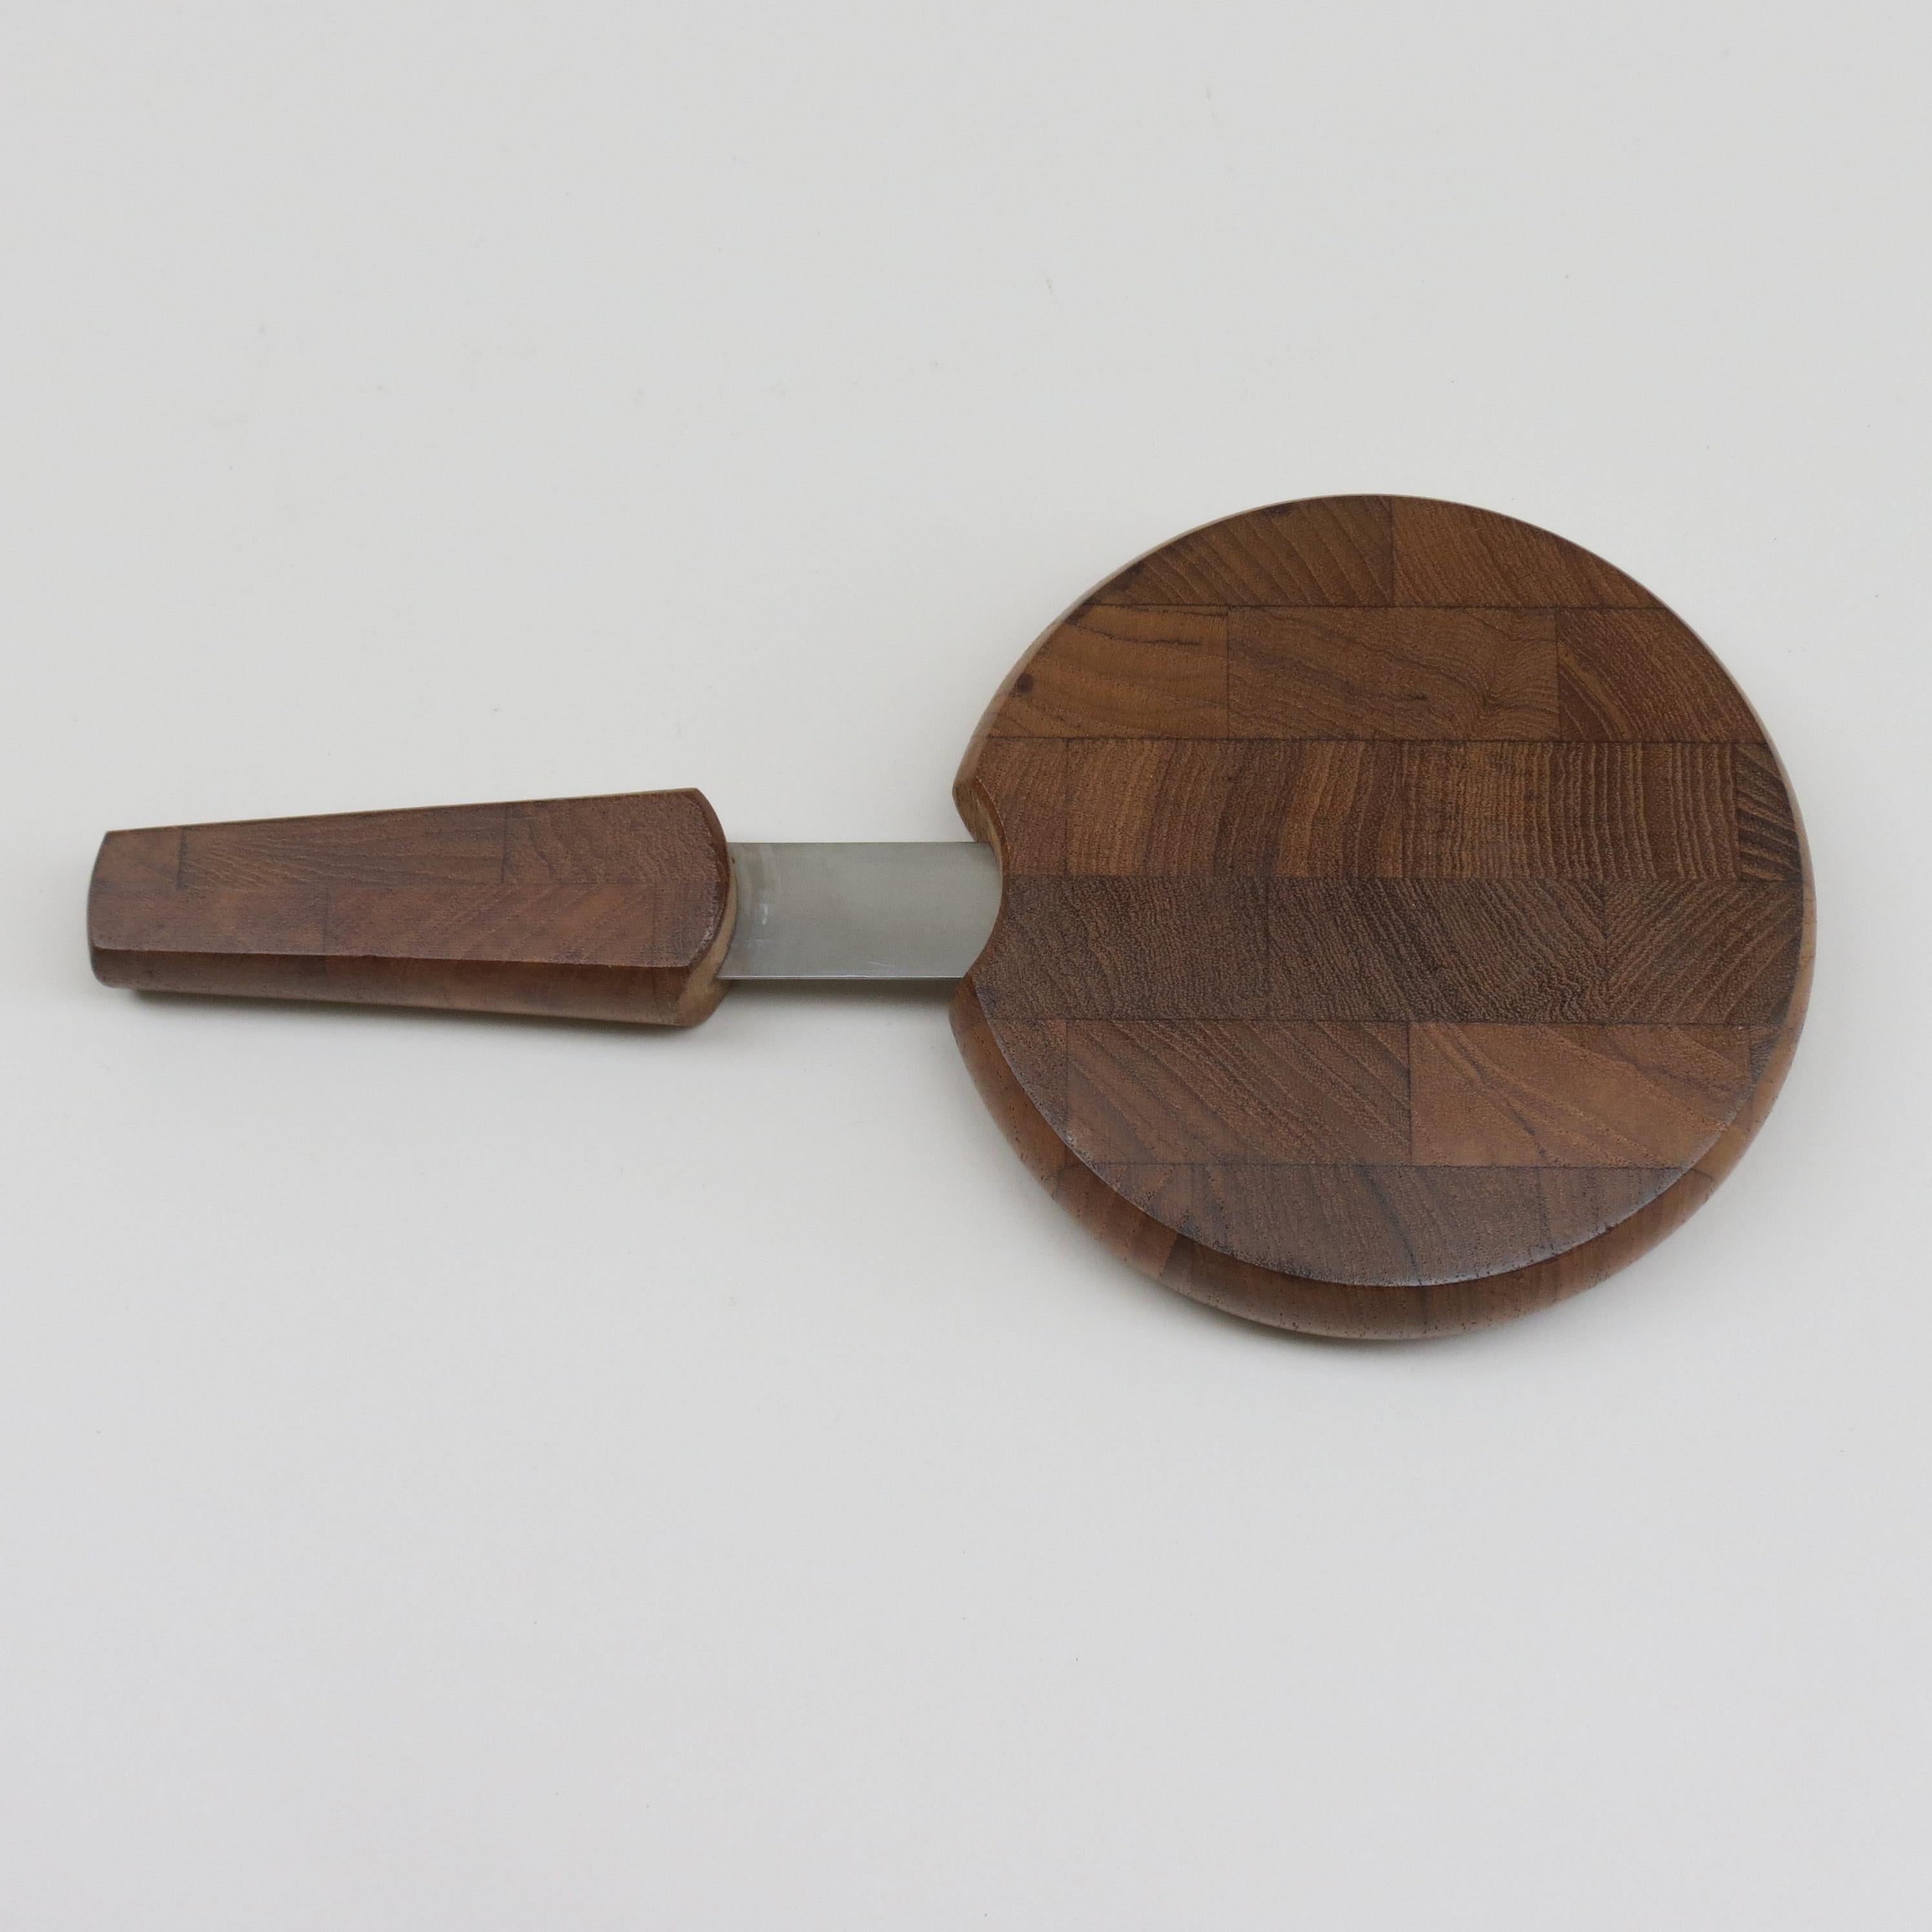 English 1950s Danish Cheese board and Knife by Dansk Design Jens Quistgaard